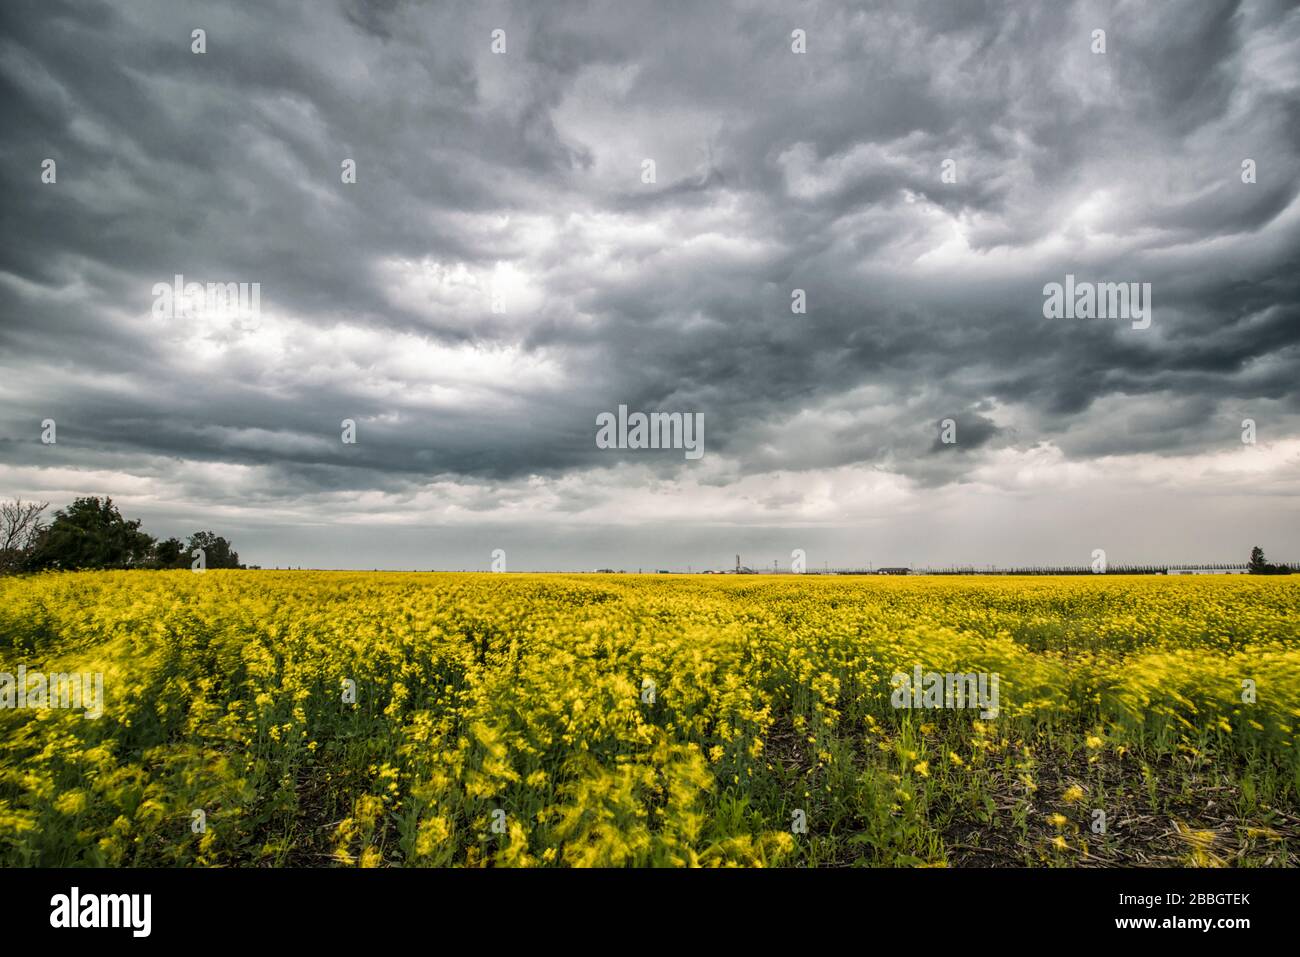 Storm dying over wind swept swirling canola field in southern rural Manitoba Canada Stock Photo